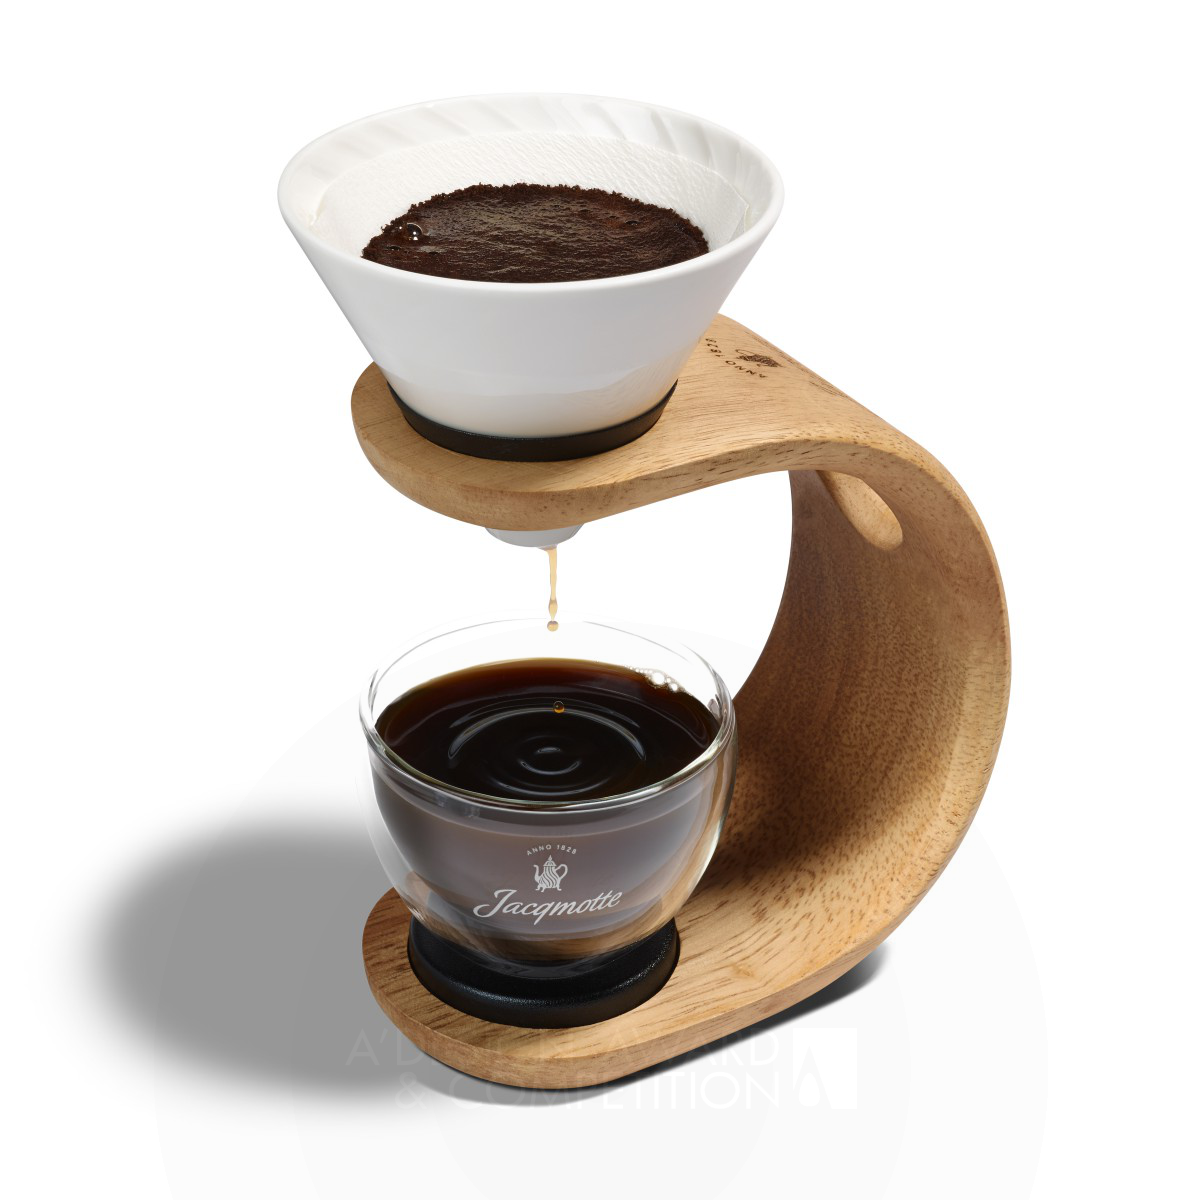 Jacqmotte Slow Drip Coffee Maker: A Perfect Blend of Design and Functionality